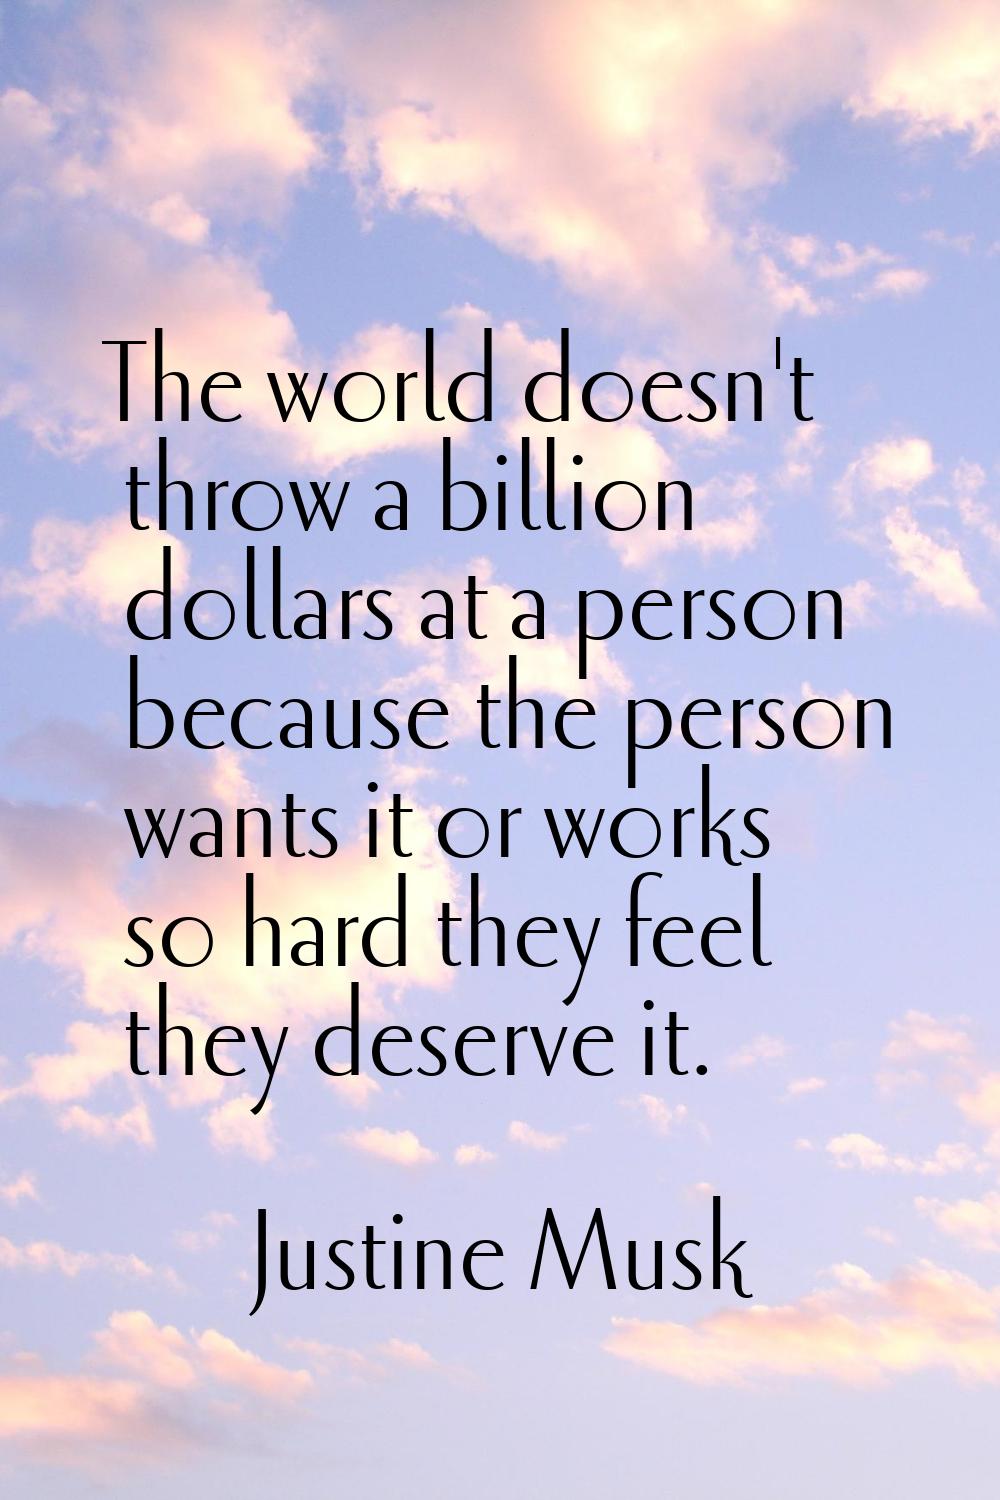 The world doesn't throw a billion dollars at a person because the person wants it or works so hard 